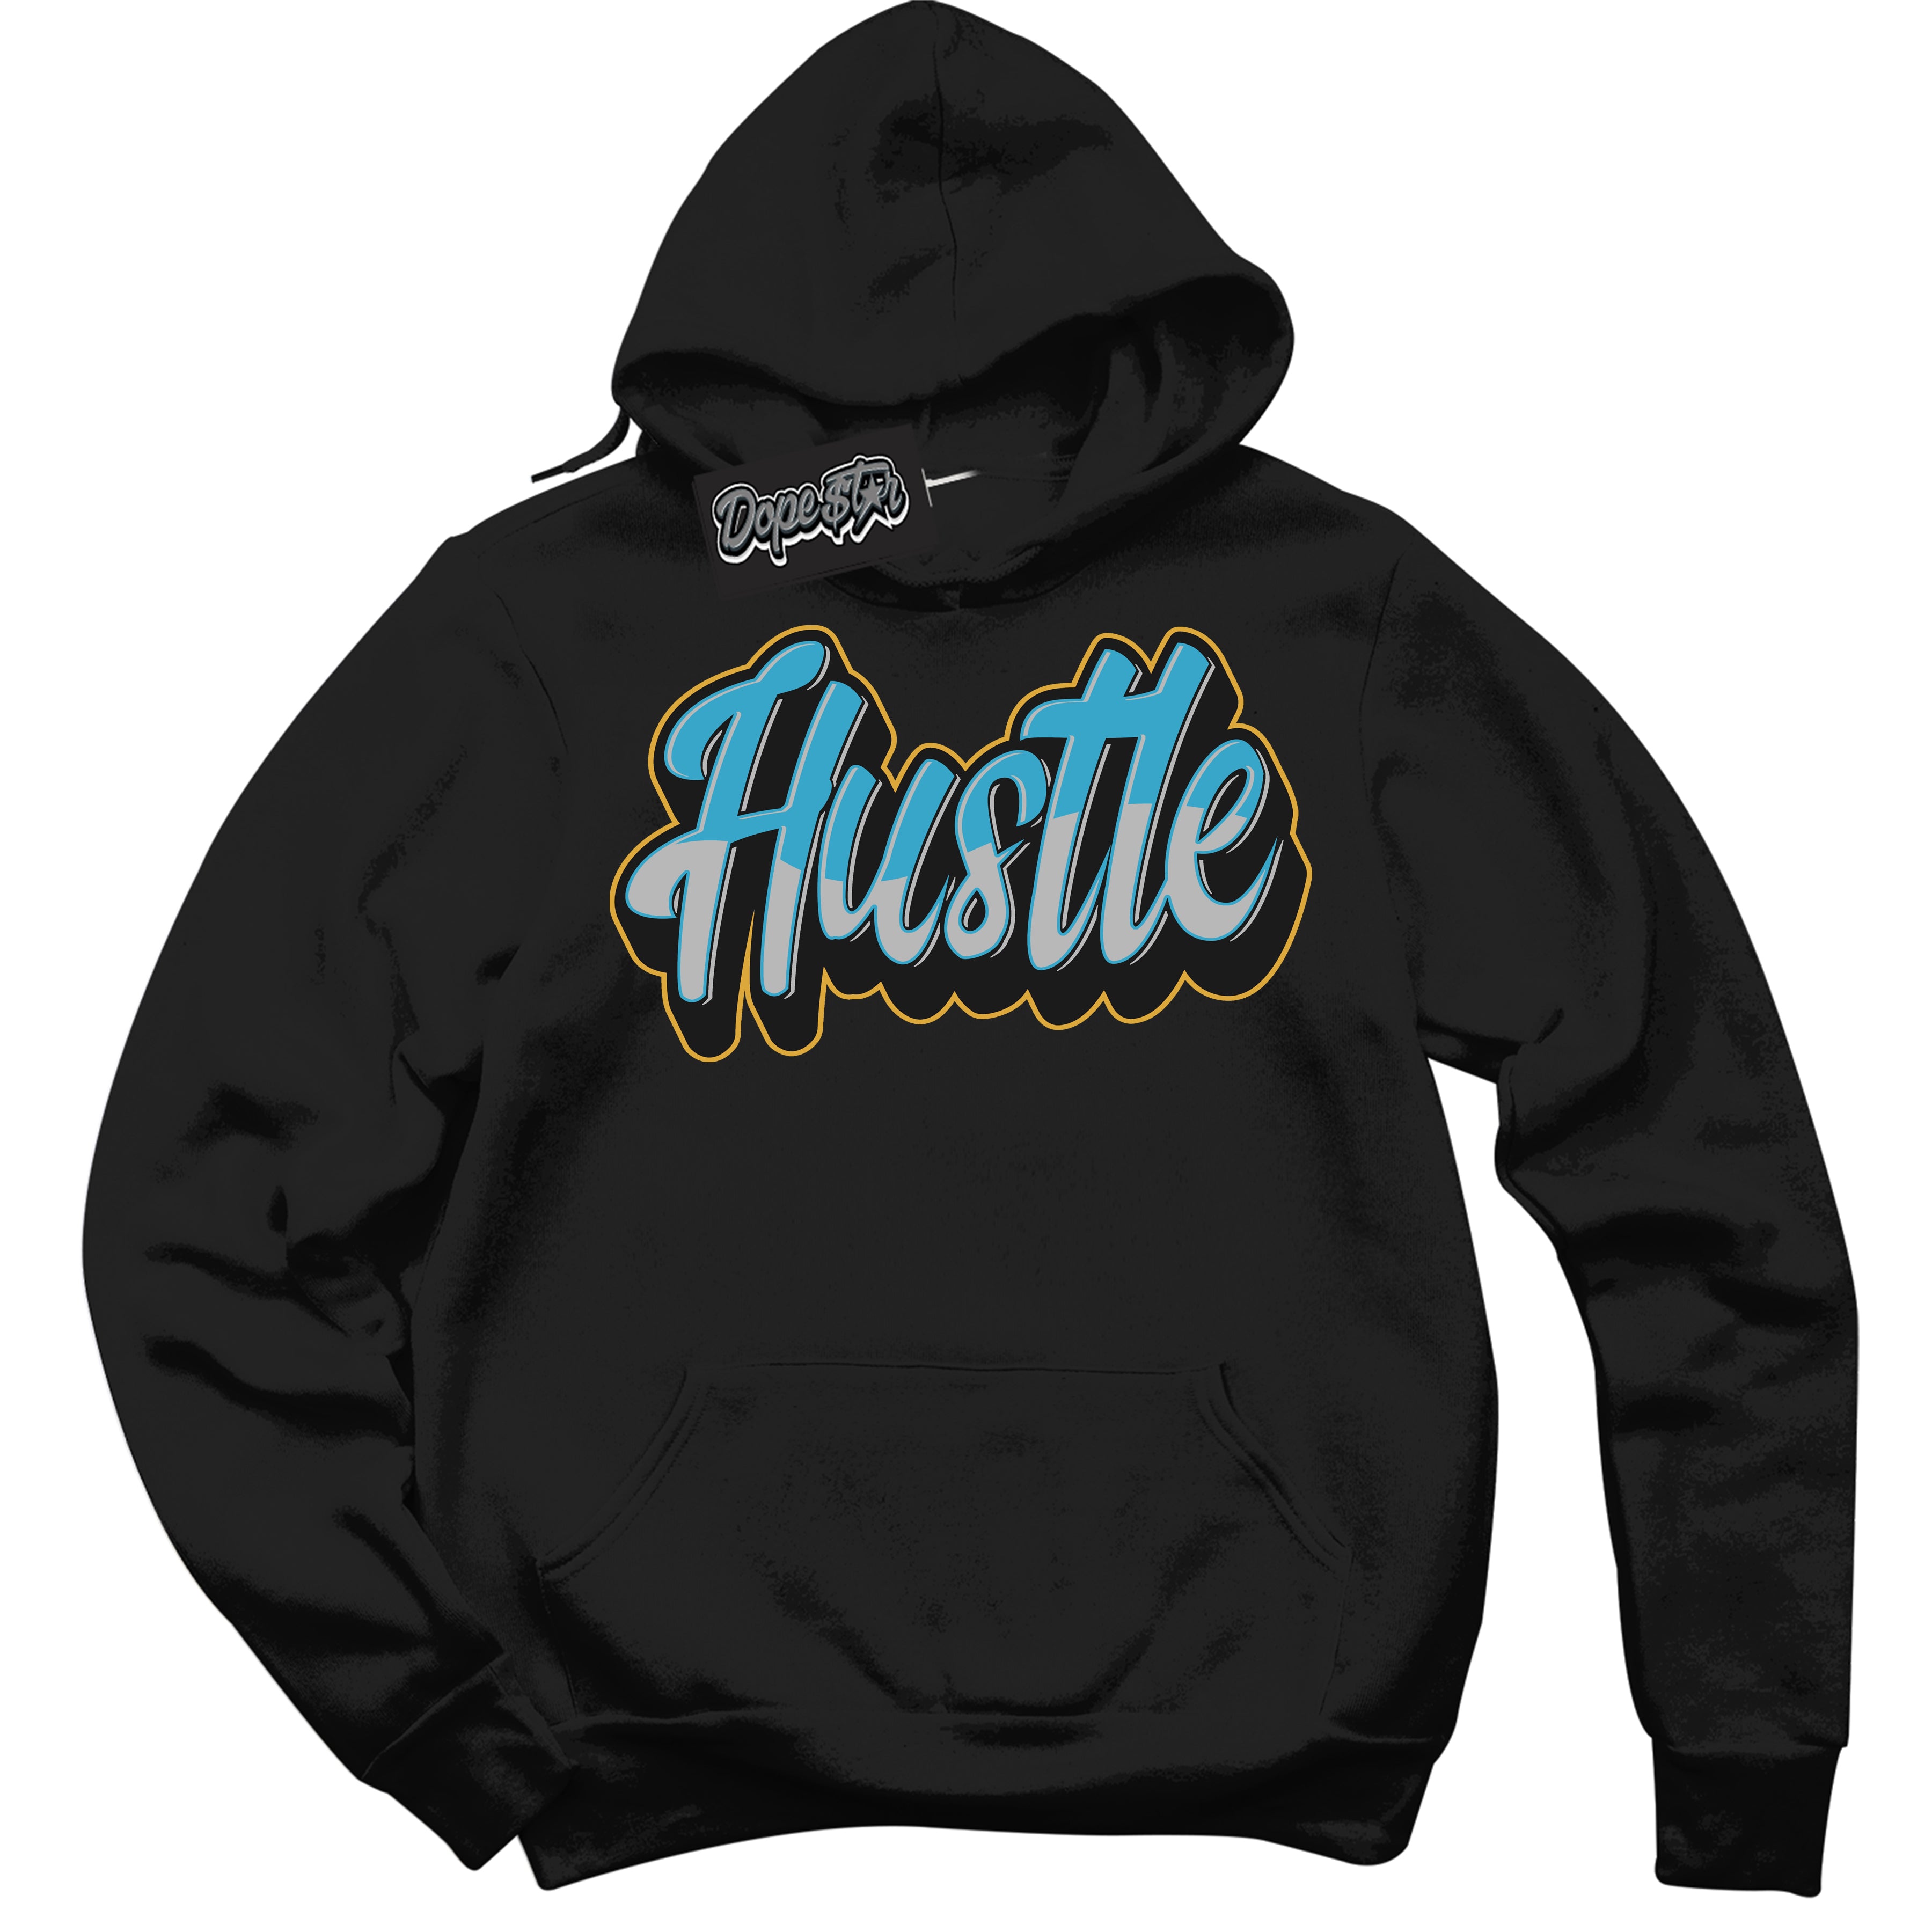 Cool Black Hoodie with “ Hustle ”  design that Perfectly Matches Aqua 5s Sneakers.